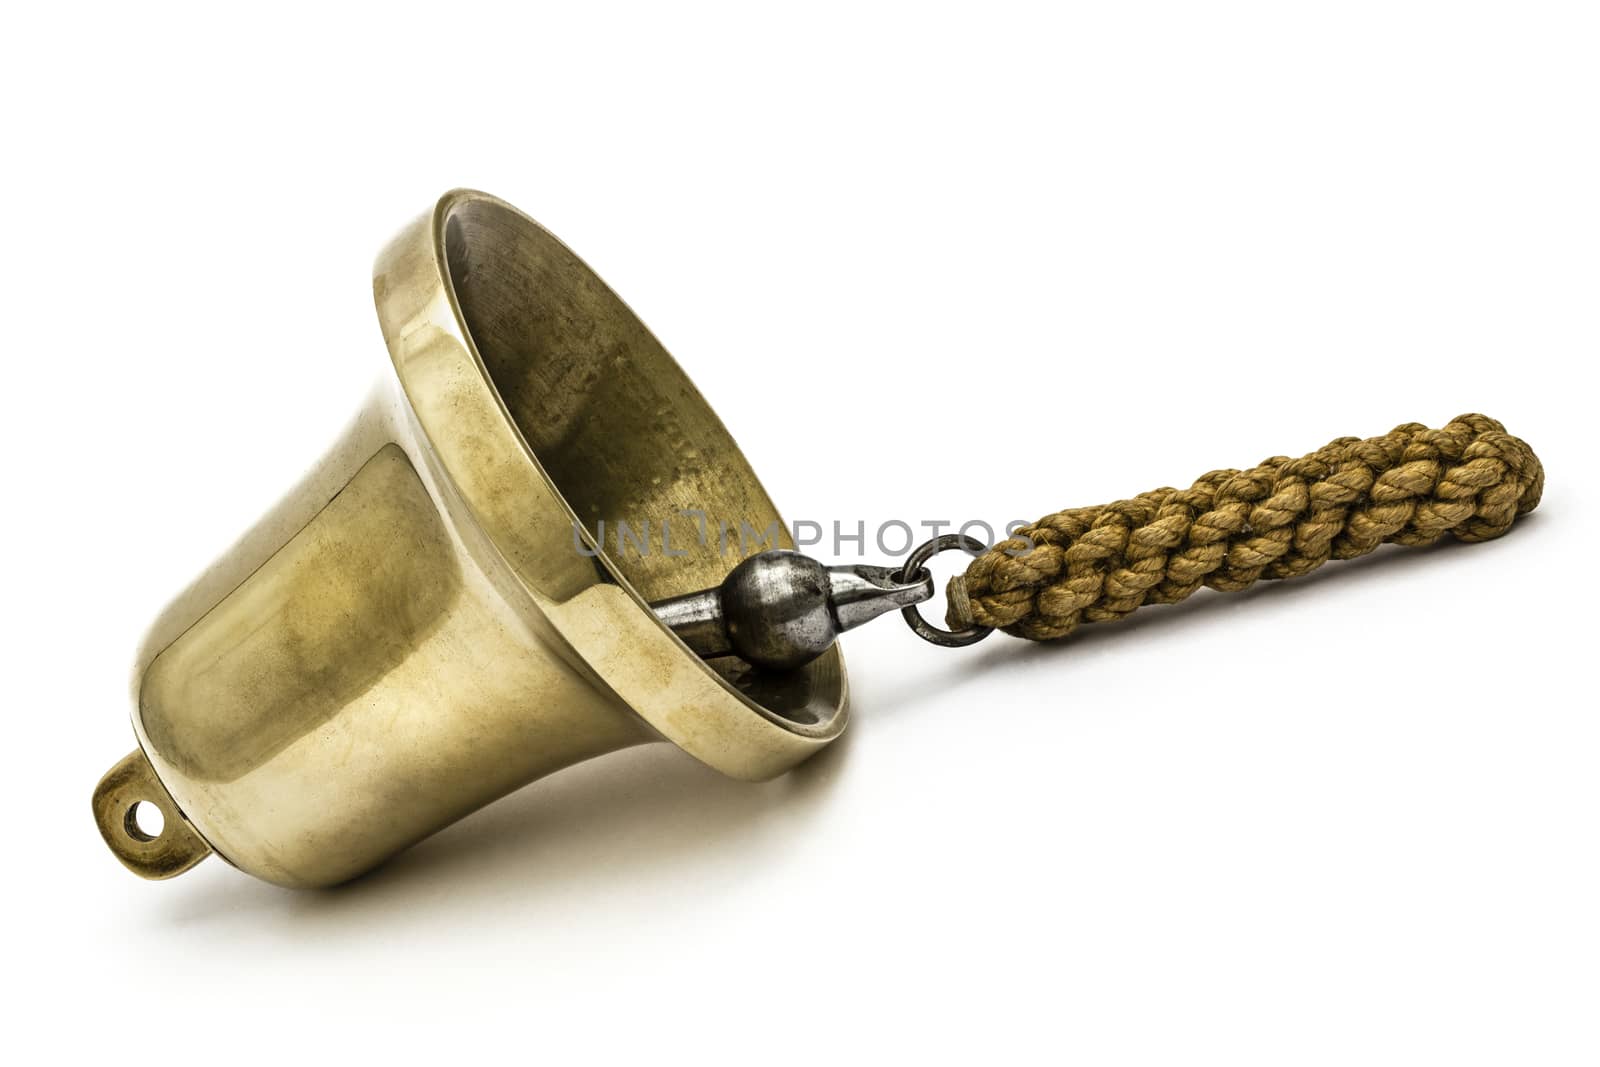 Brass bell, isolated on white background